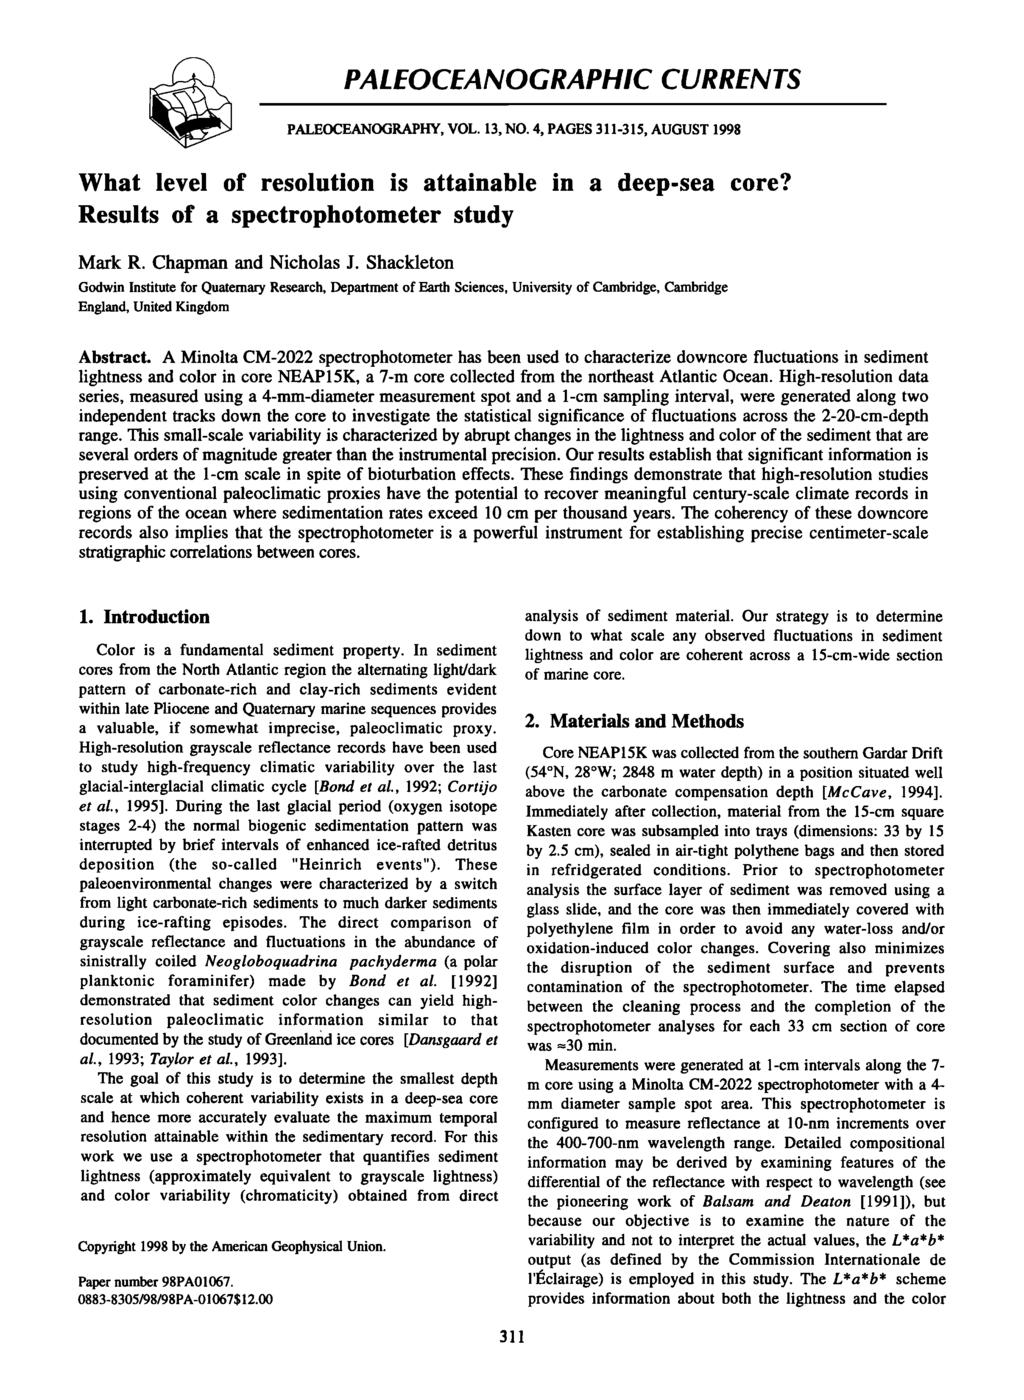 PALEOCEANOGRAPHIC CURRENTS PALEOCEANOGRAPHY, VOL. 13, NO. 4, PAGES 311-315, AUGUST 1998 What level of resolution is attainable Results of a spectrophotometer study in a deep-sea core? Mark R.